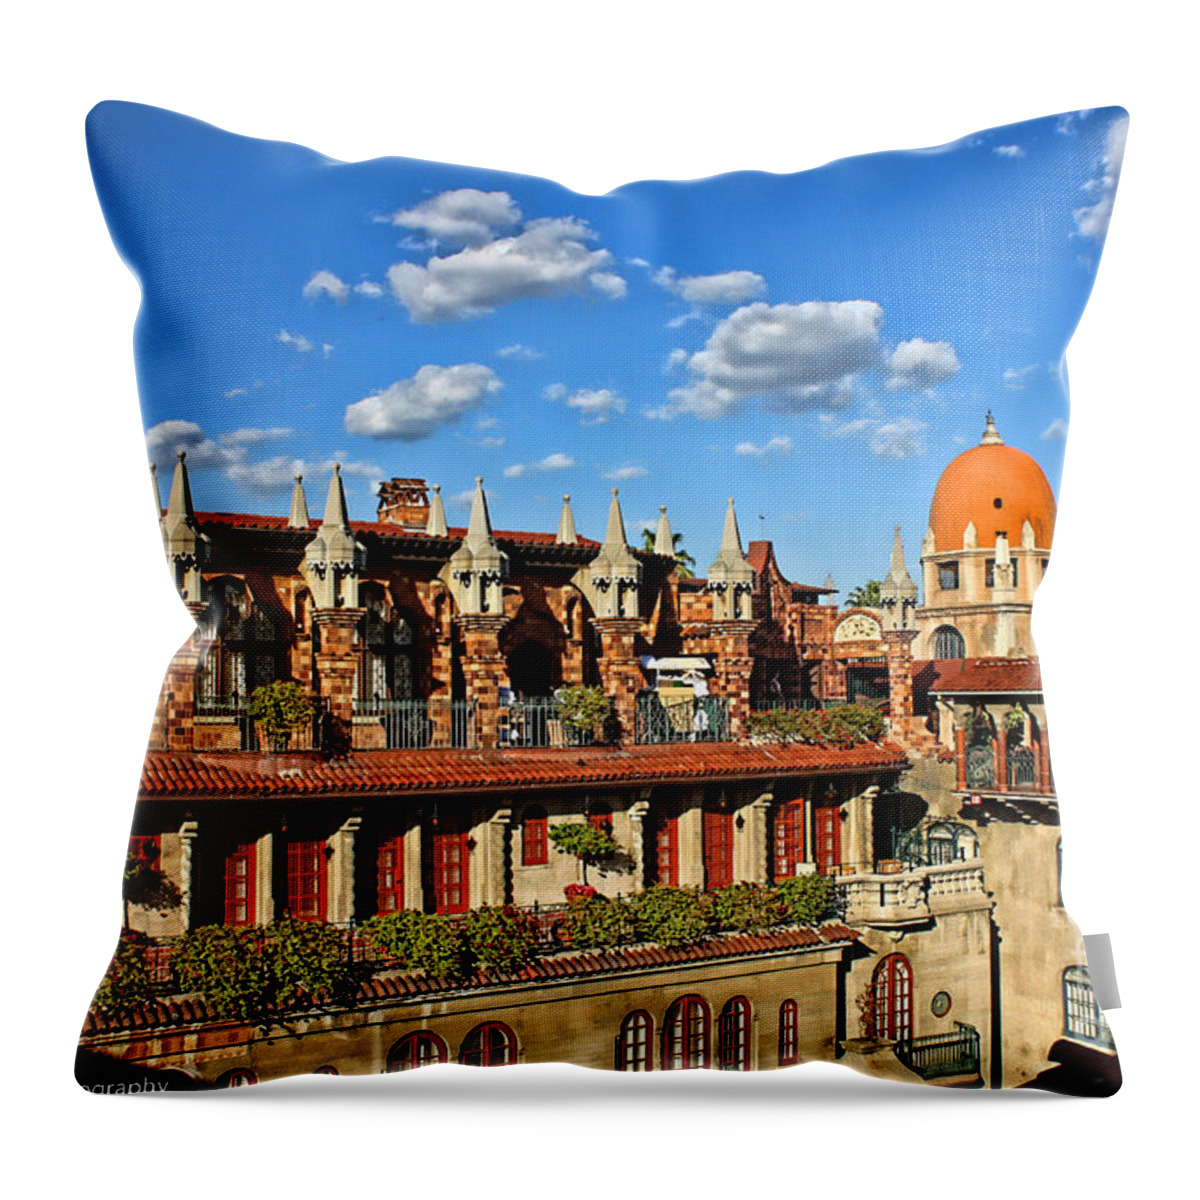 Mission Inn Throw Pillow featuring the photograph Mission Inn Skyline by Tommy Anderson